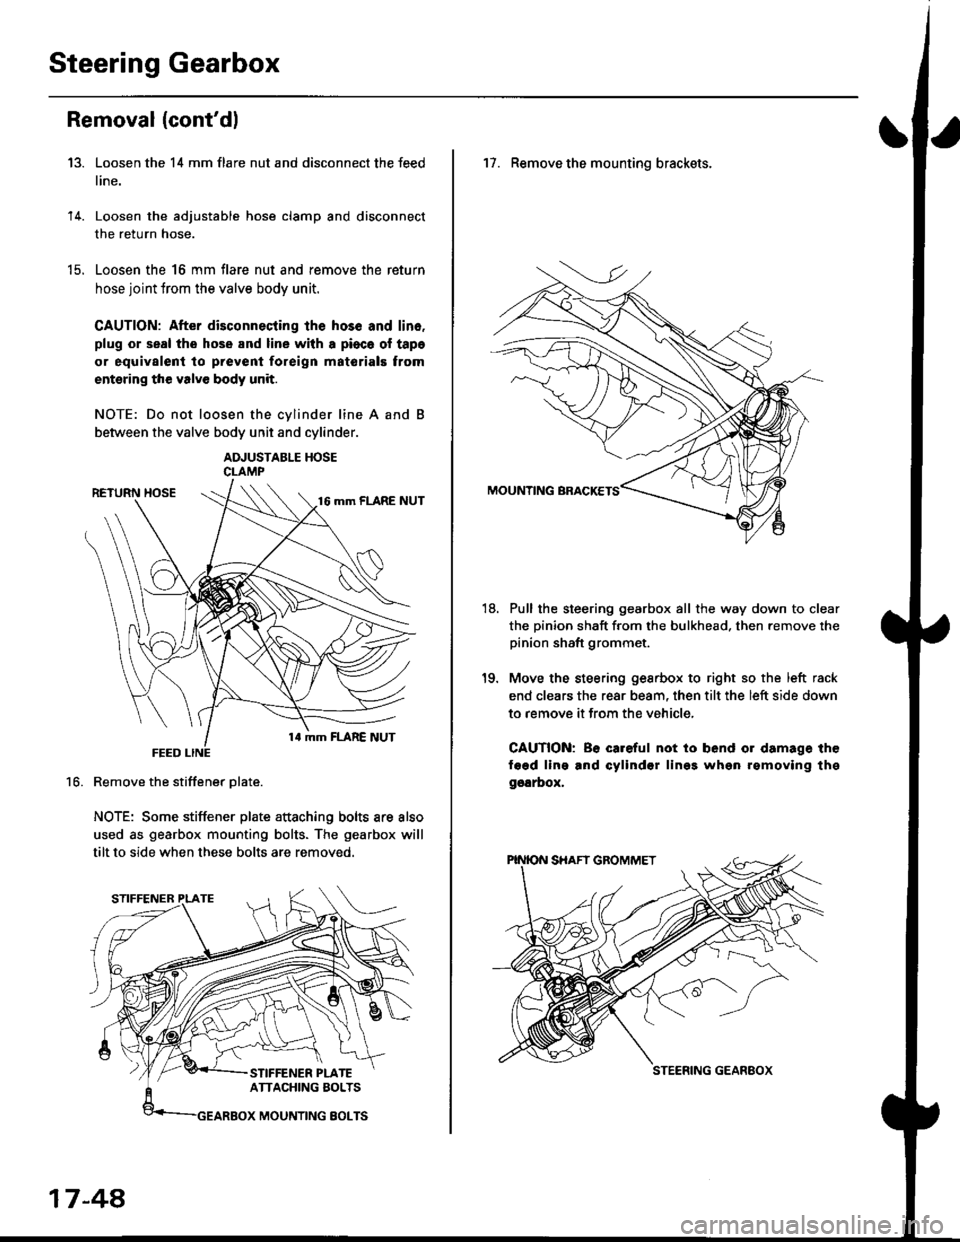 HONDA CIVIC 1996 6.G Owners Manual Steering Gearbox
Removal {contdl
Loosen the 14 mm flare nut and disconnect the feed
line.
Loosen the adjustable hose clamp and disconnect
the return hose.
Loosen the 16 mm flare nut and remove the re